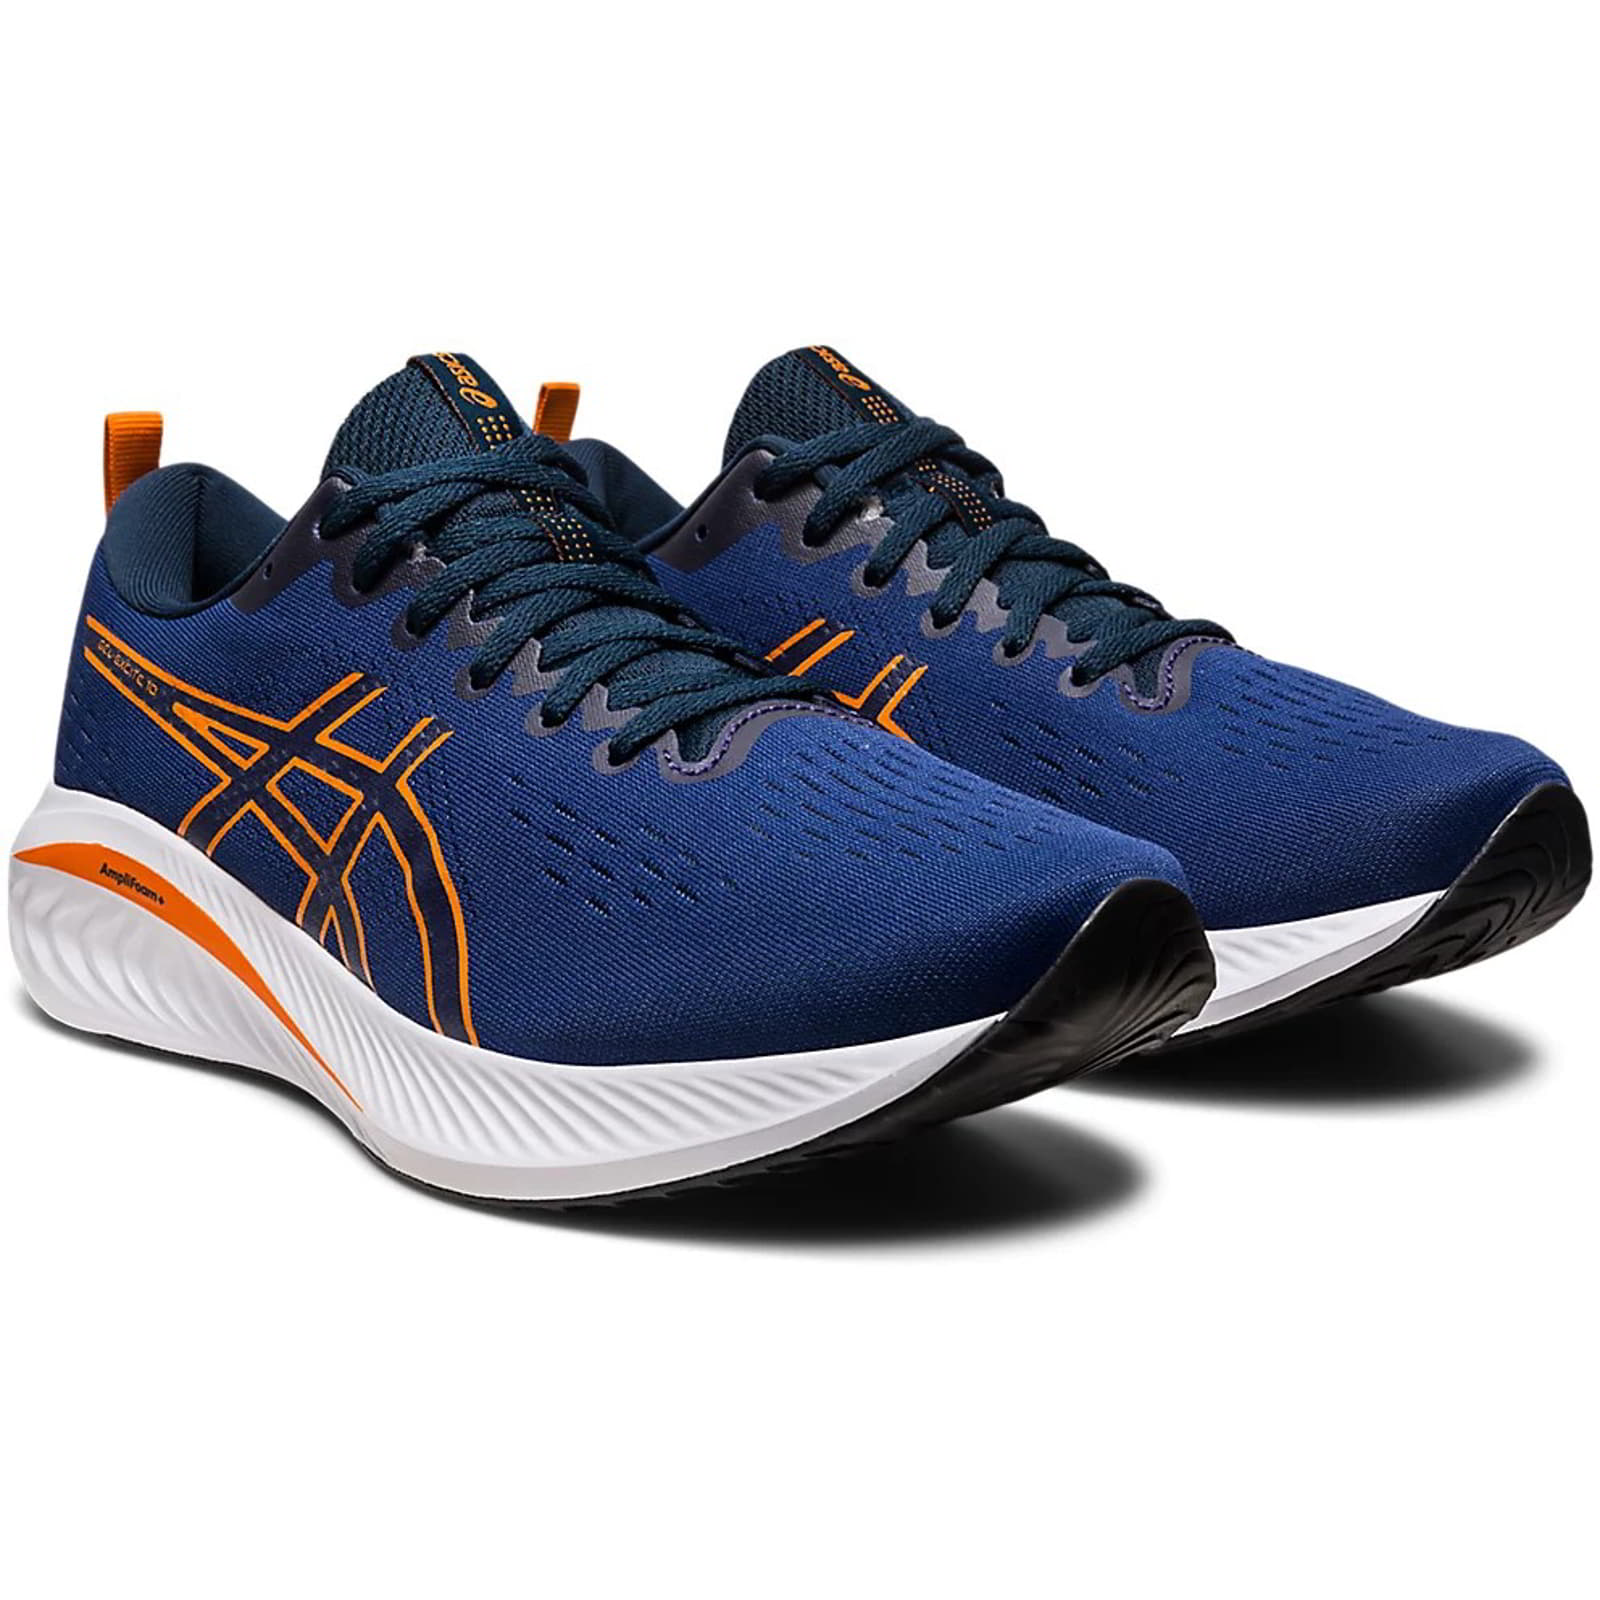 Asics Men's Gel Excite 10 Running Shoes Trainers - UK 9